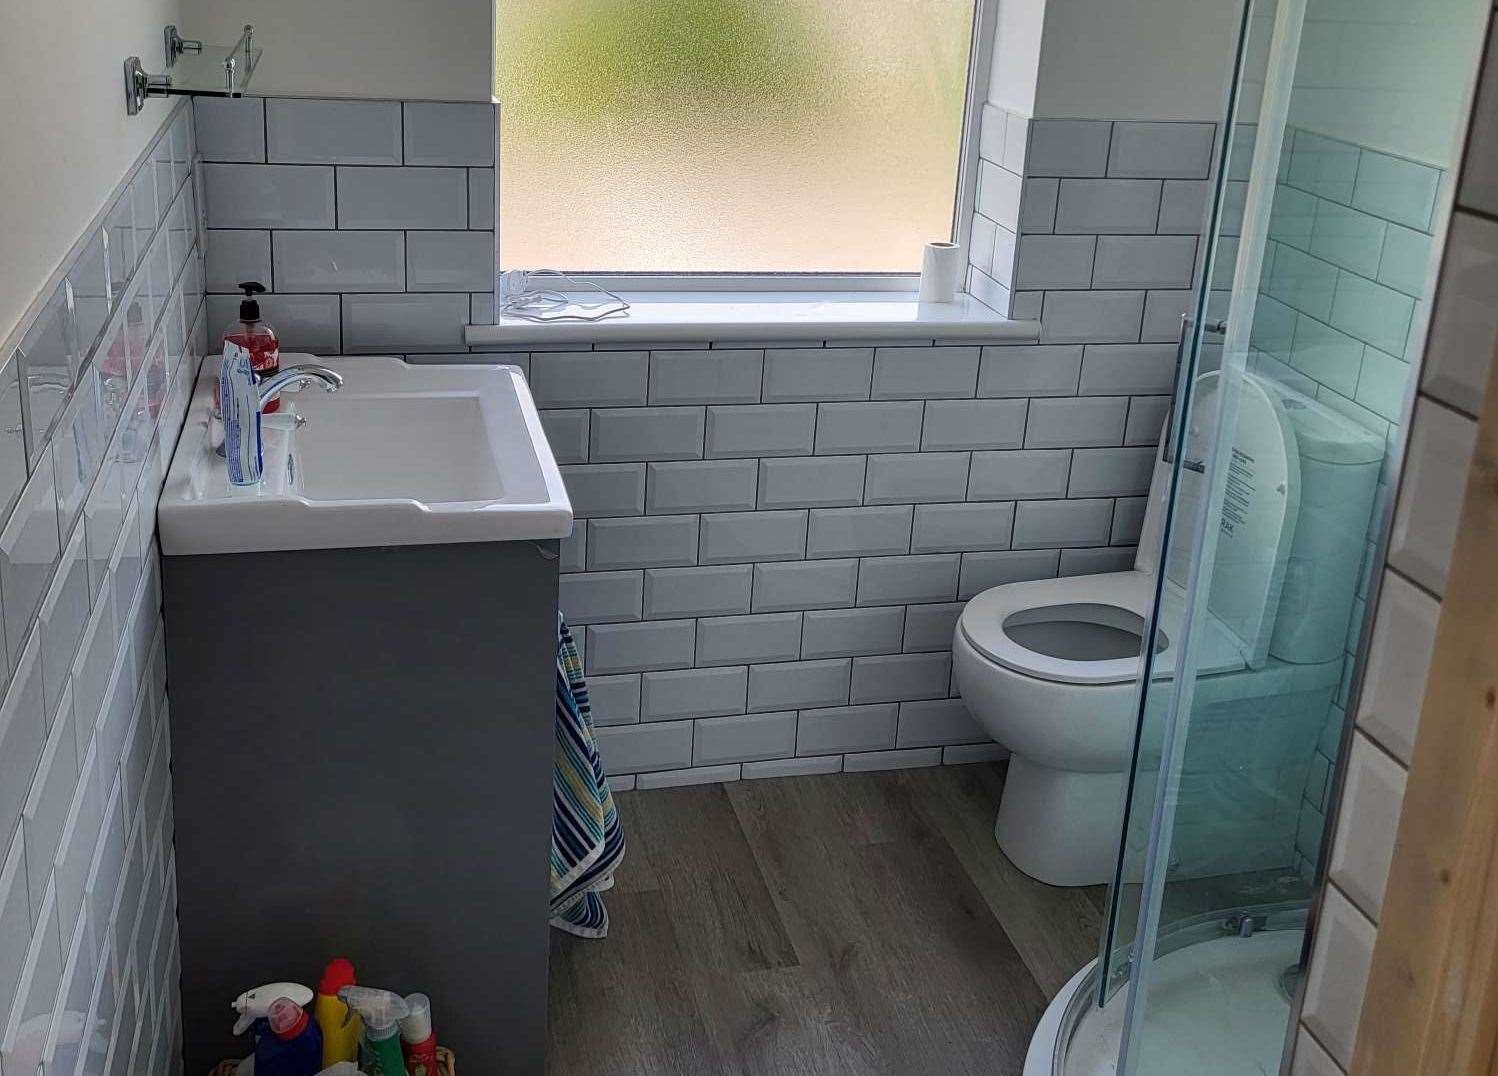 The couple paid over £7,000 for a brand new bathroom. but this is what they were left with